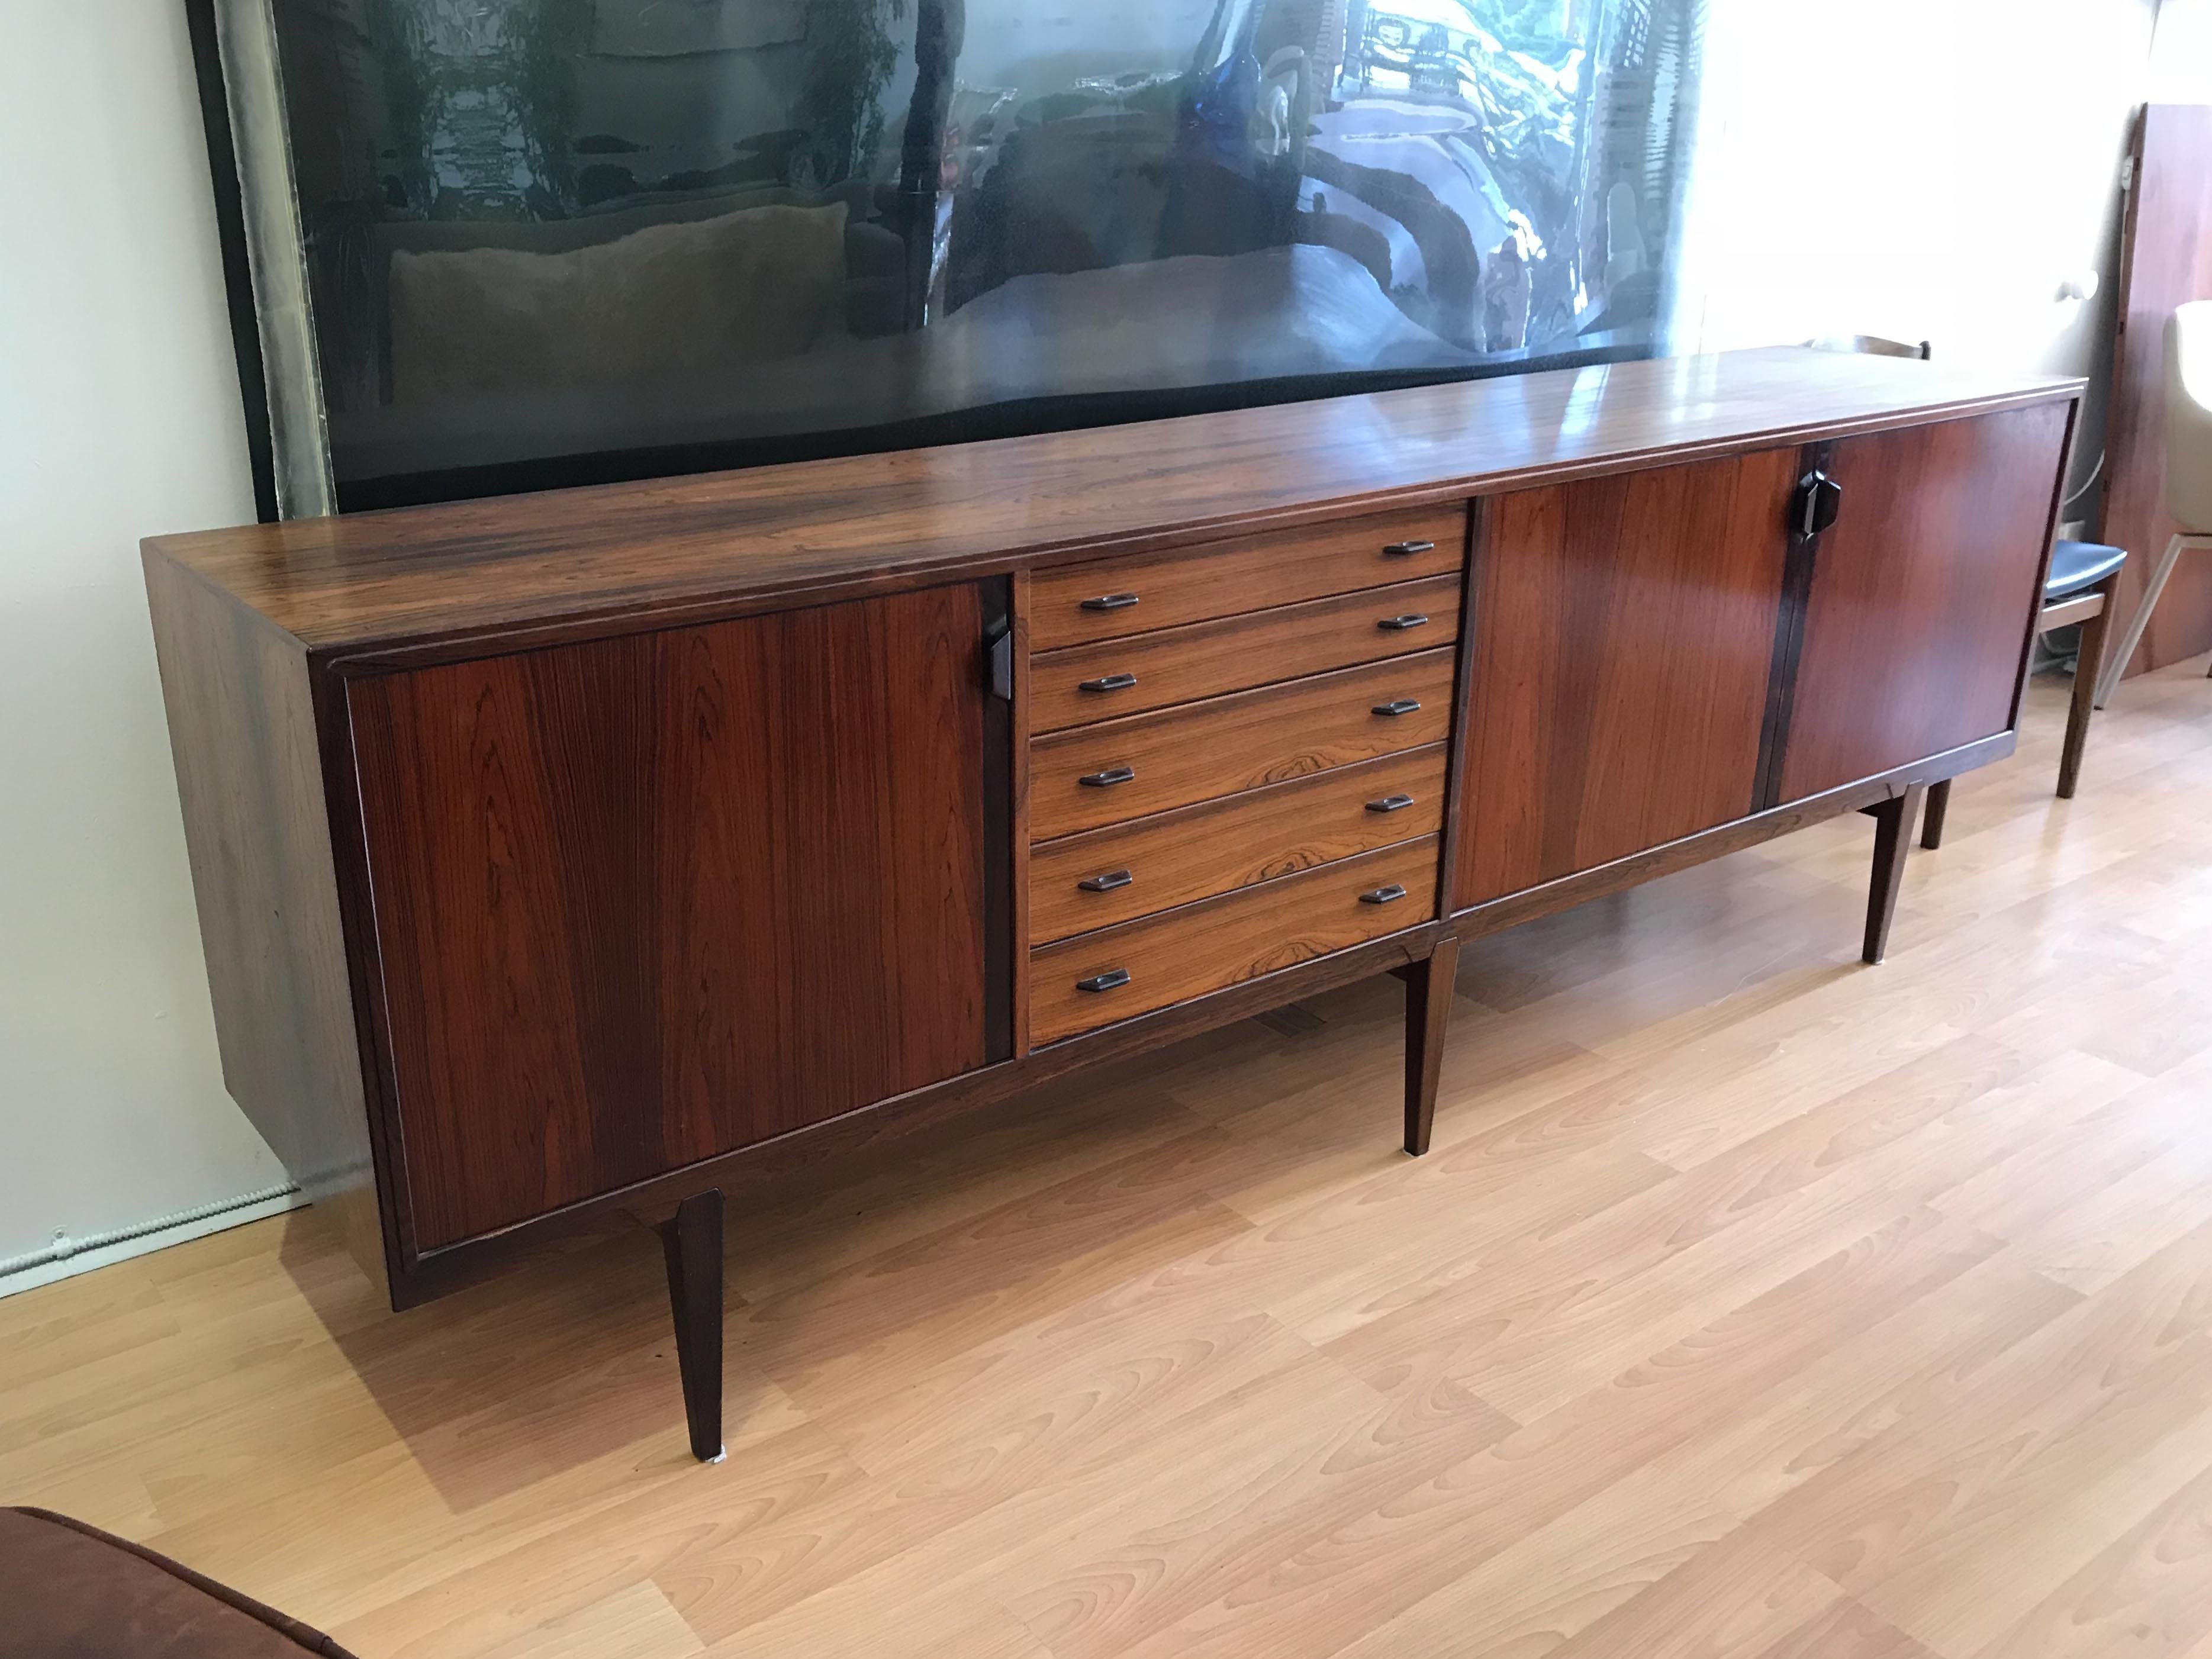 Designed by Henry Rosengren Hansen for Brande Møbelindustri this large sideboard offers plentiful storage, with five drawers and adjustable shelving behind three doors with brass hardware and carved handles.

In very good vintage condition, please